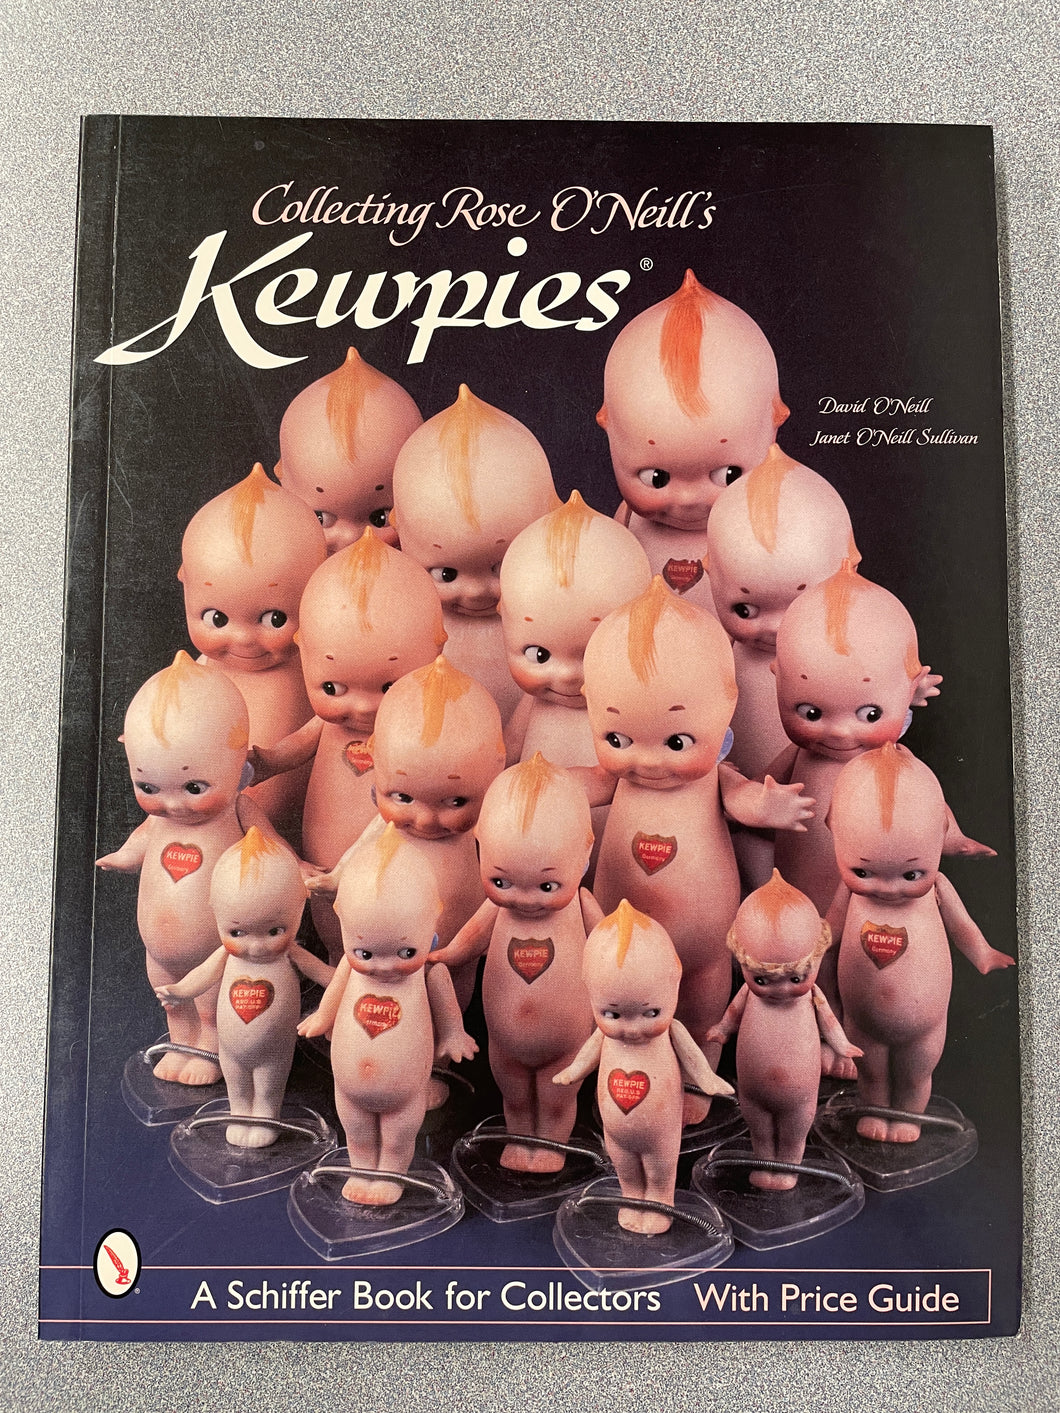 CG  Collecting Rose O'Neill's Kewpies: A Schiffer Book for Collectors With Price Guide, O'Neill, David and Janet O'Neill Sullivan [2003] N 3/24